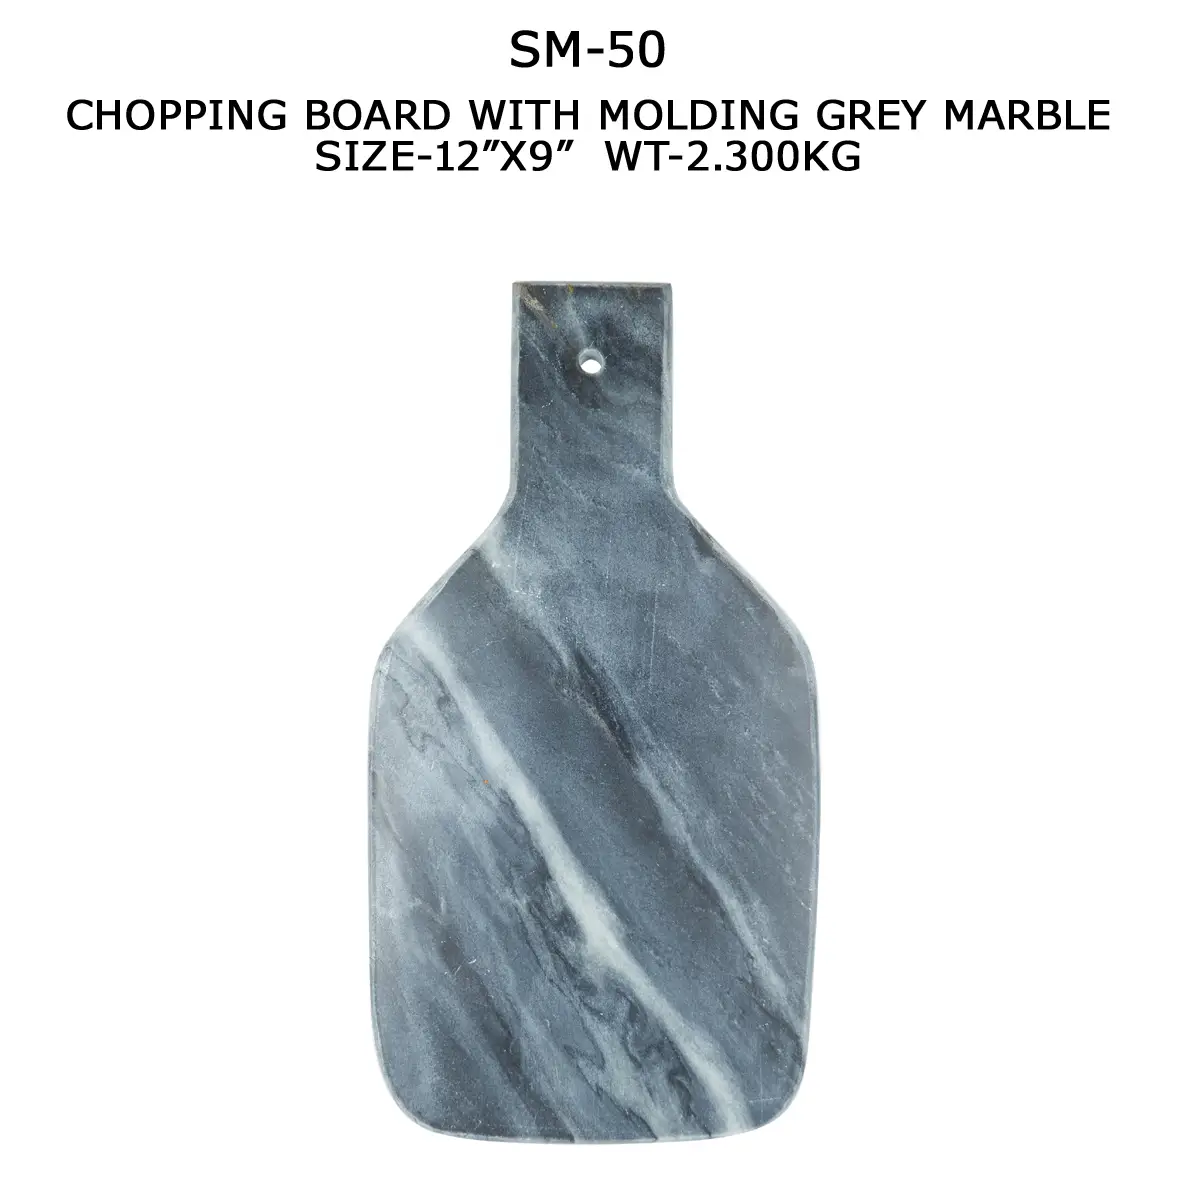 CHOPING BOARD GREY MARBLE WITH HANDLE &
MOLDING